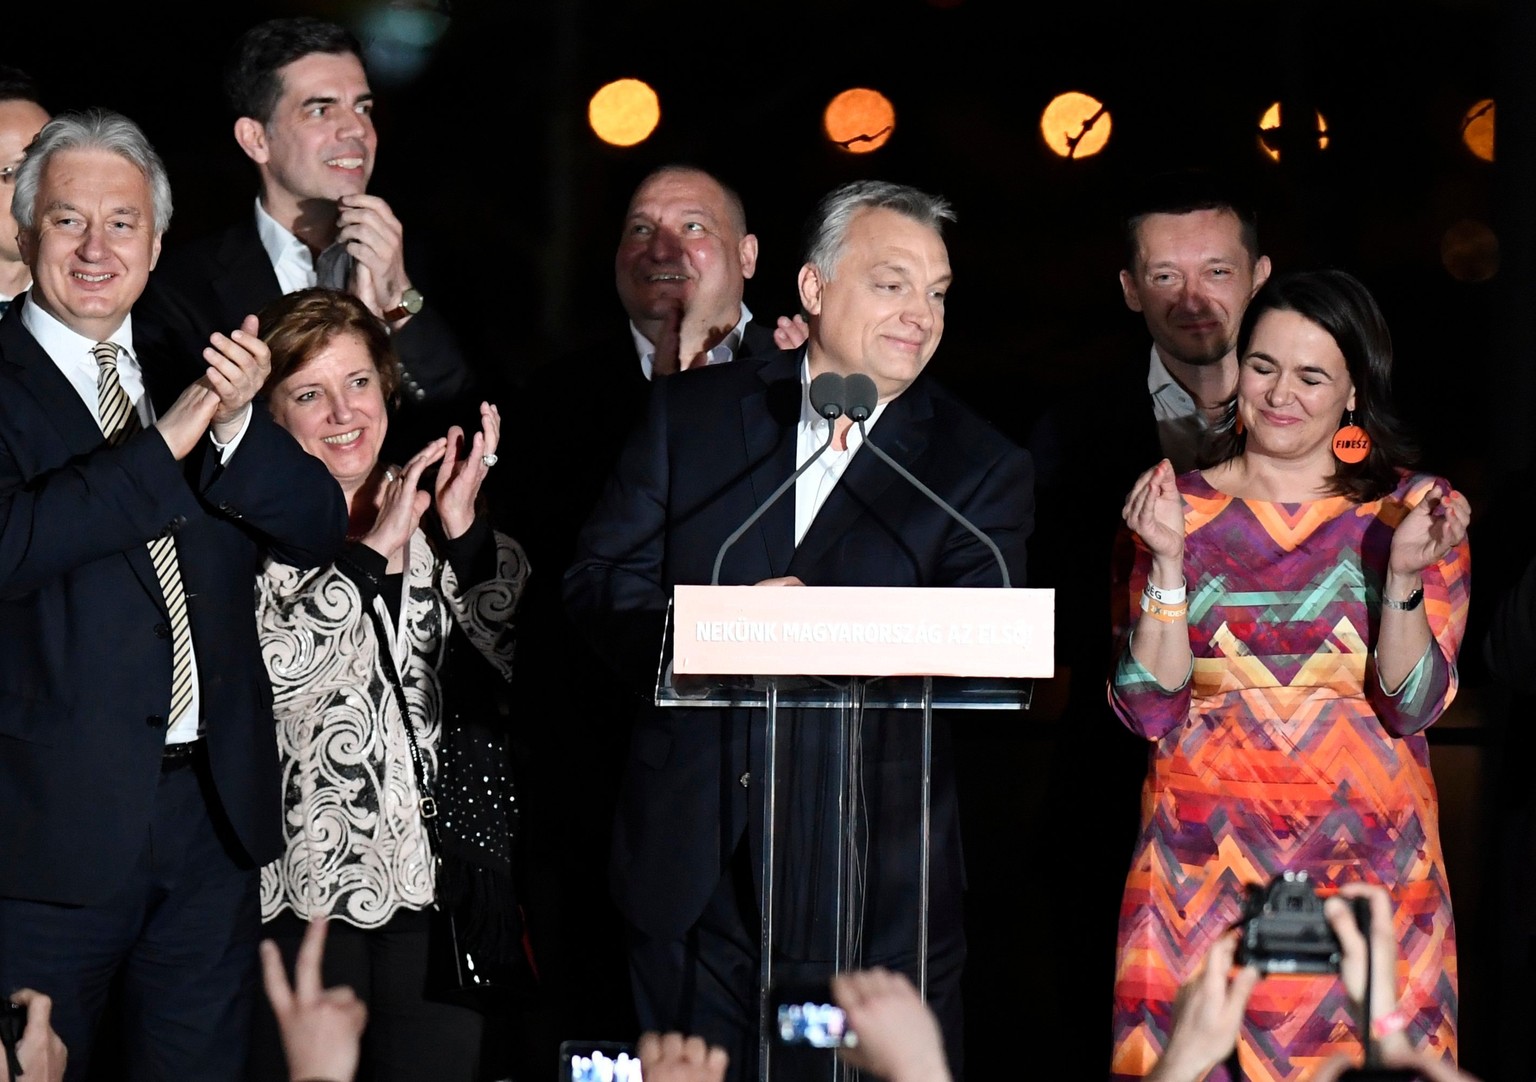 Hungarian Prime Minister and Chairman of Fidesz Party Viktor Orban, center, and Deputy Prime Minister and Chairman of the Christian Democratic Party Zsolt Semjen, left, celebrate the win of Fidesz and ...